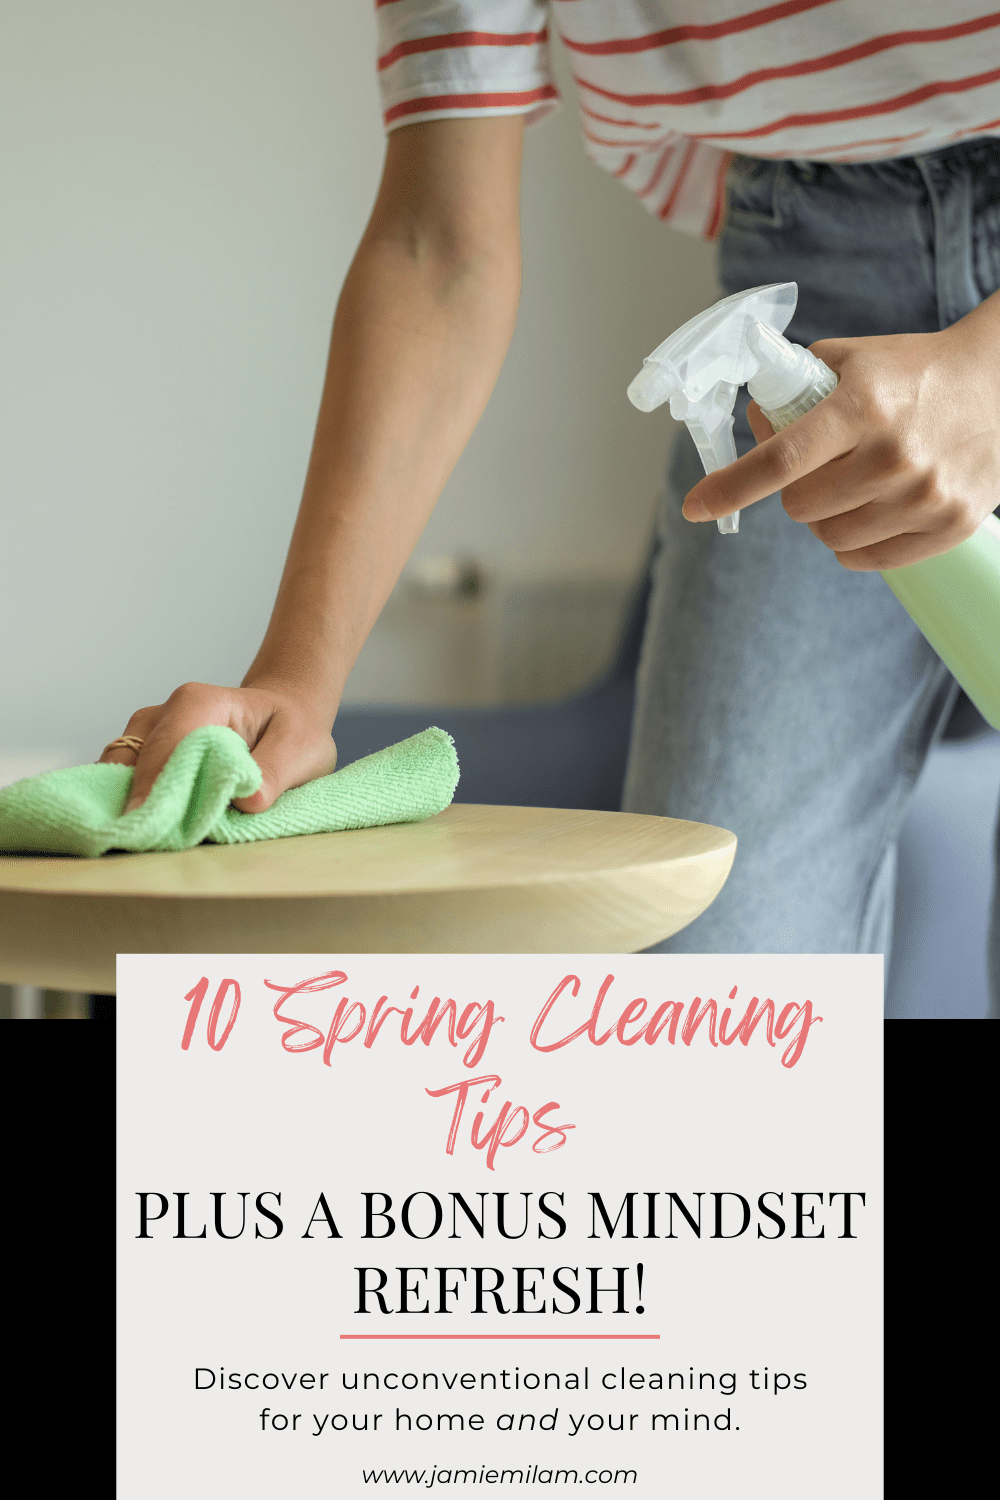 Image of someone cleaning with a cloth and the text "10 Spring Cleaning Tips, Plus a Bonus Mindset Refresh"